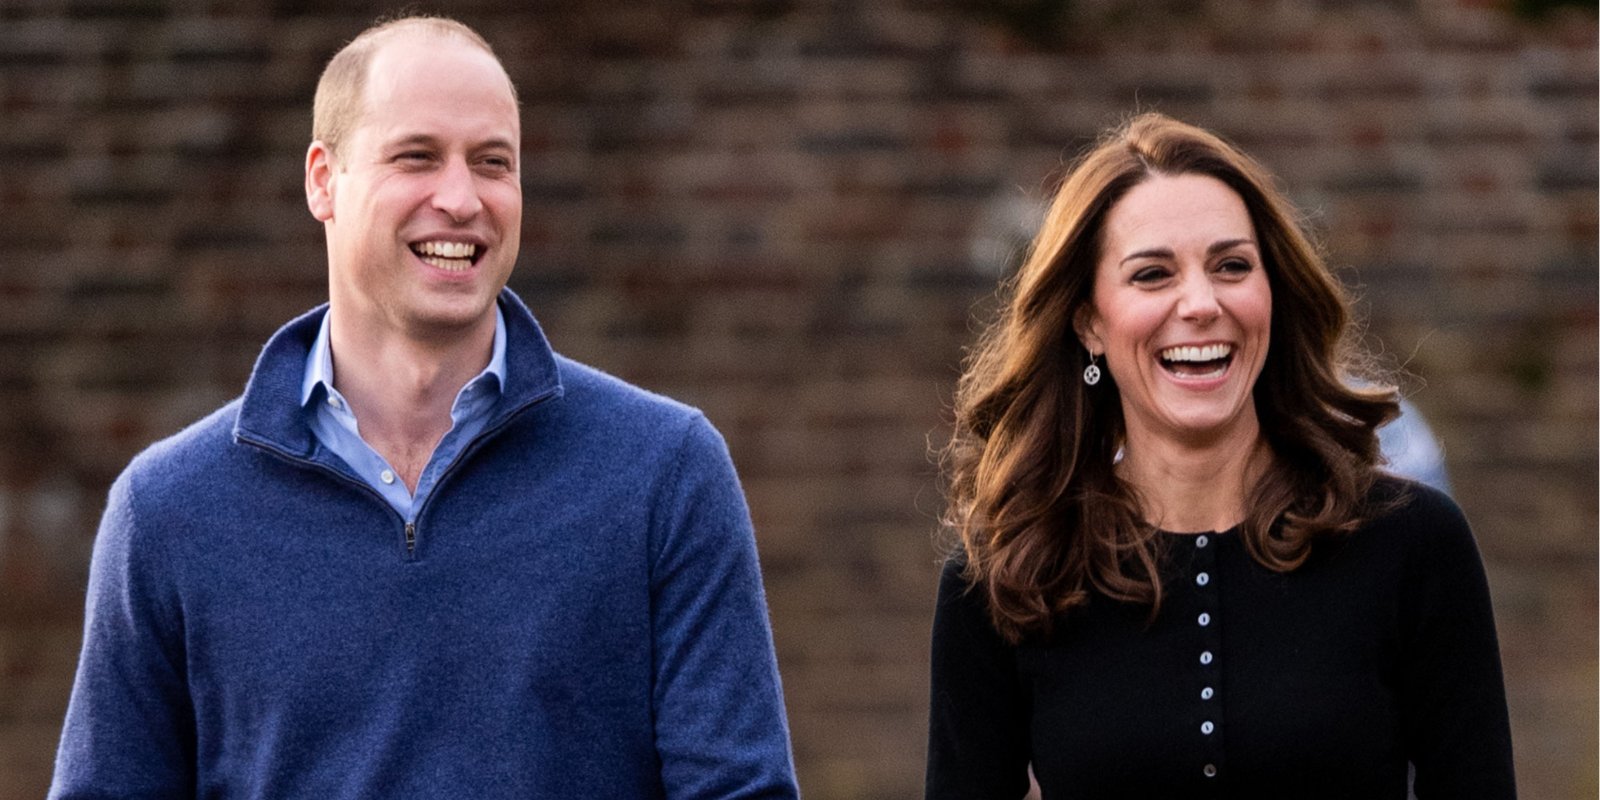 Prince William and Kate Middleton pose in 2018 at an official royal photo call.